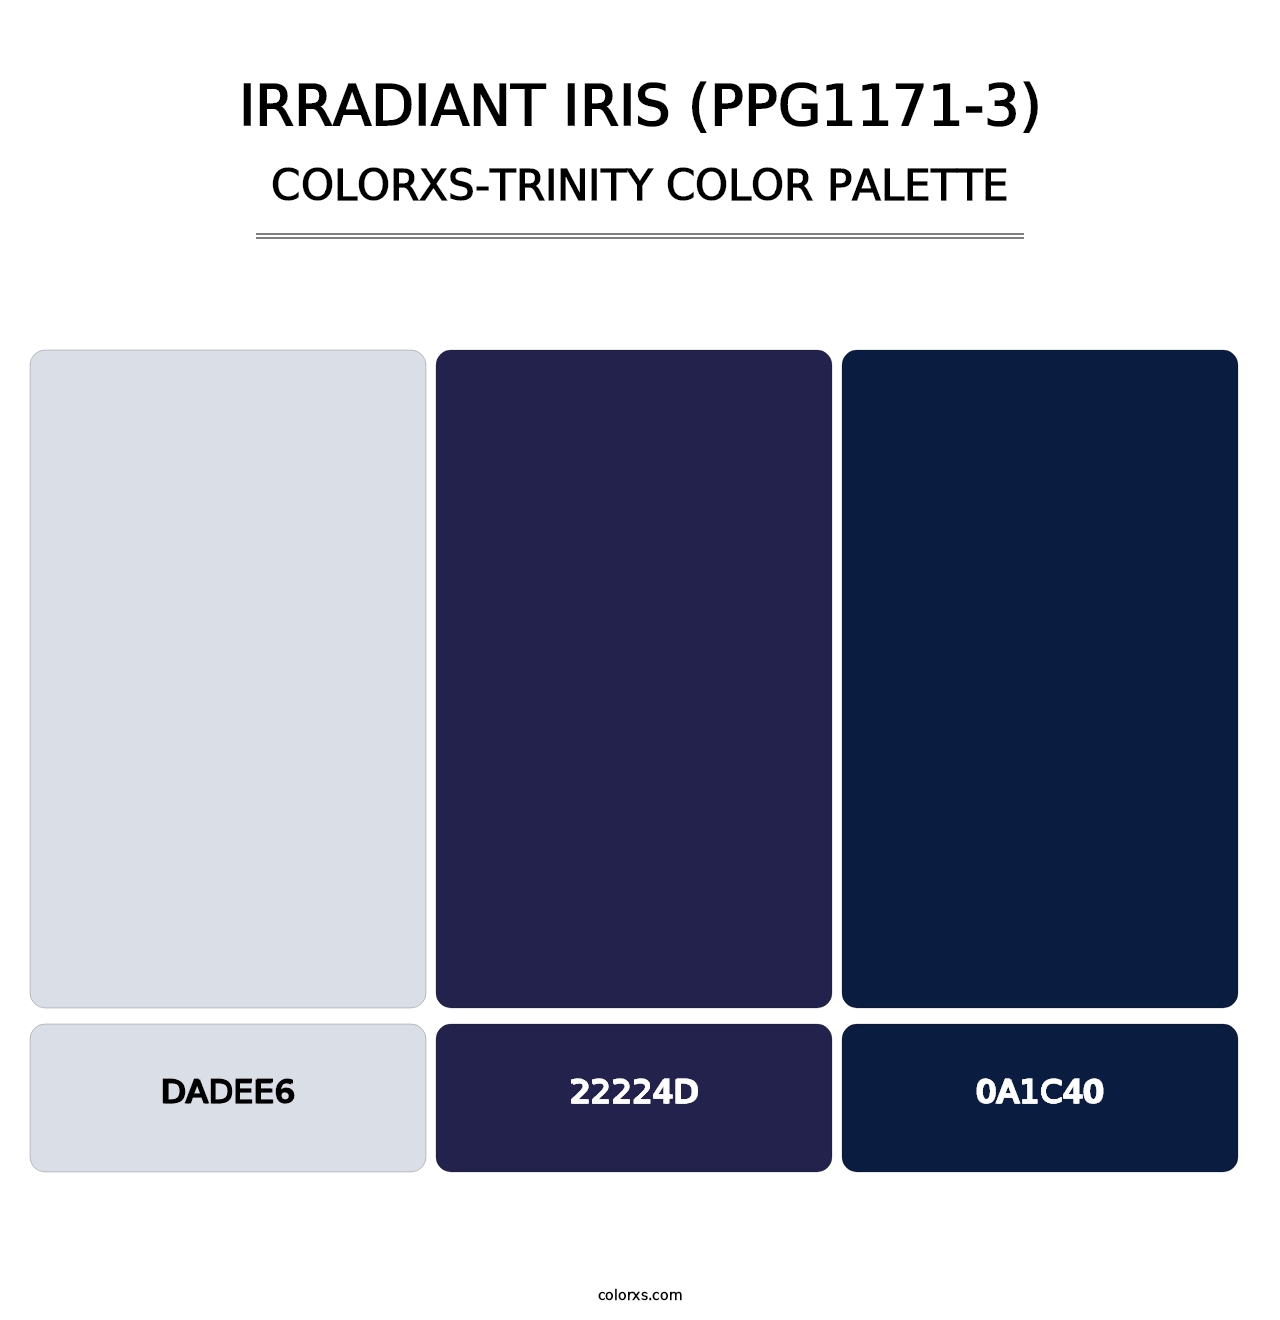 Irradiant Iris (PPG1171-3) - Colorxs Trinity Palette